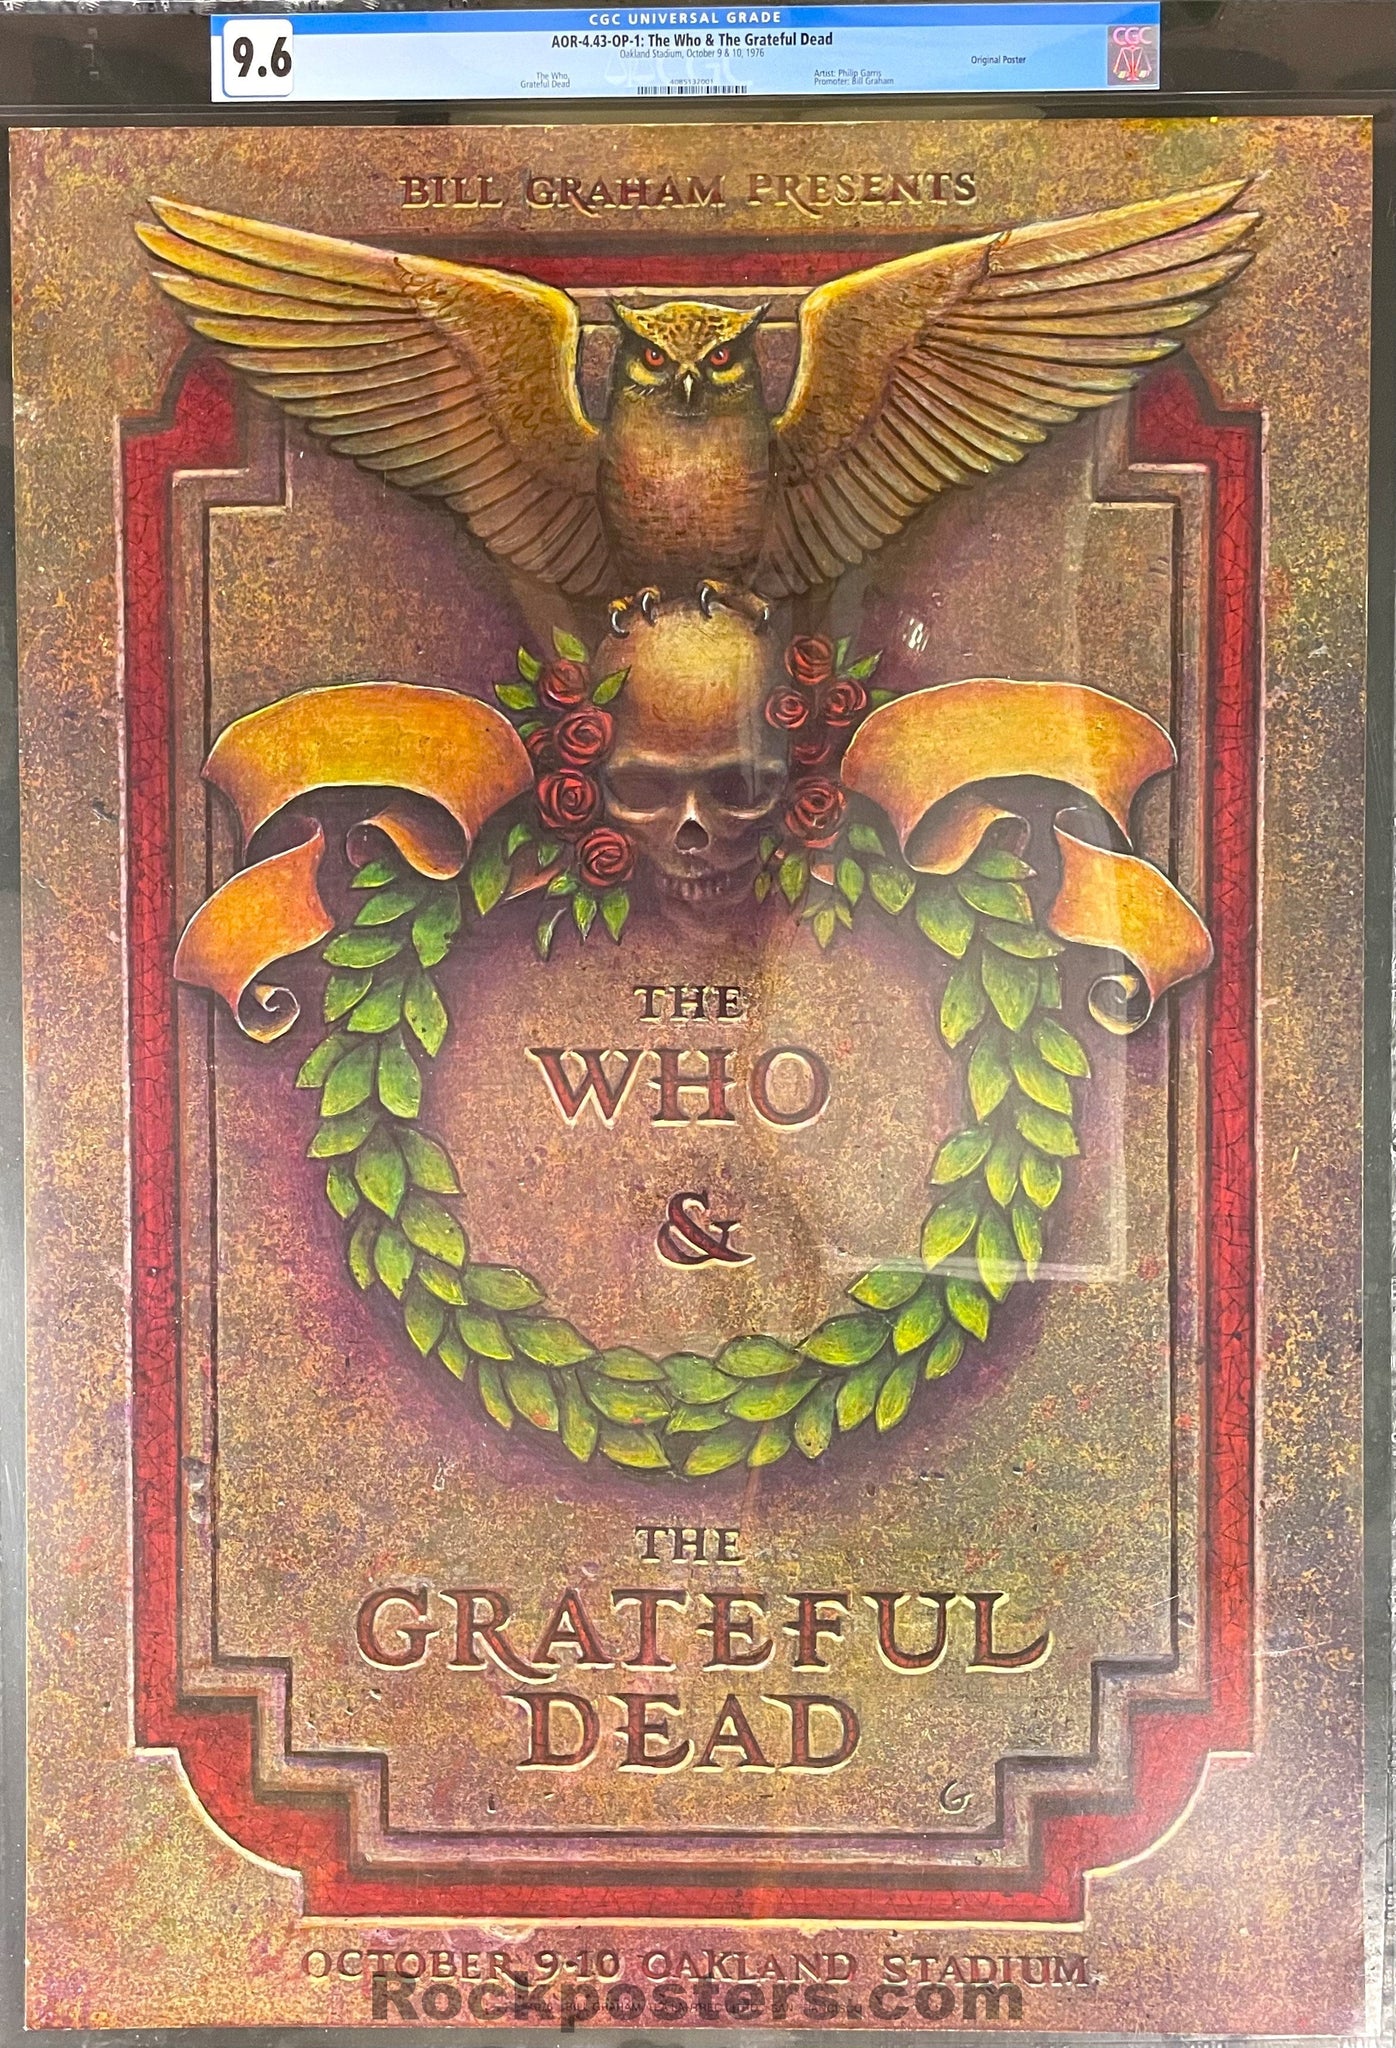 AUCTION -  AOR 4.43 - The Who Grateful Dead - 1976 Poster - Oakland Coliseum - CGC Graded 9.6